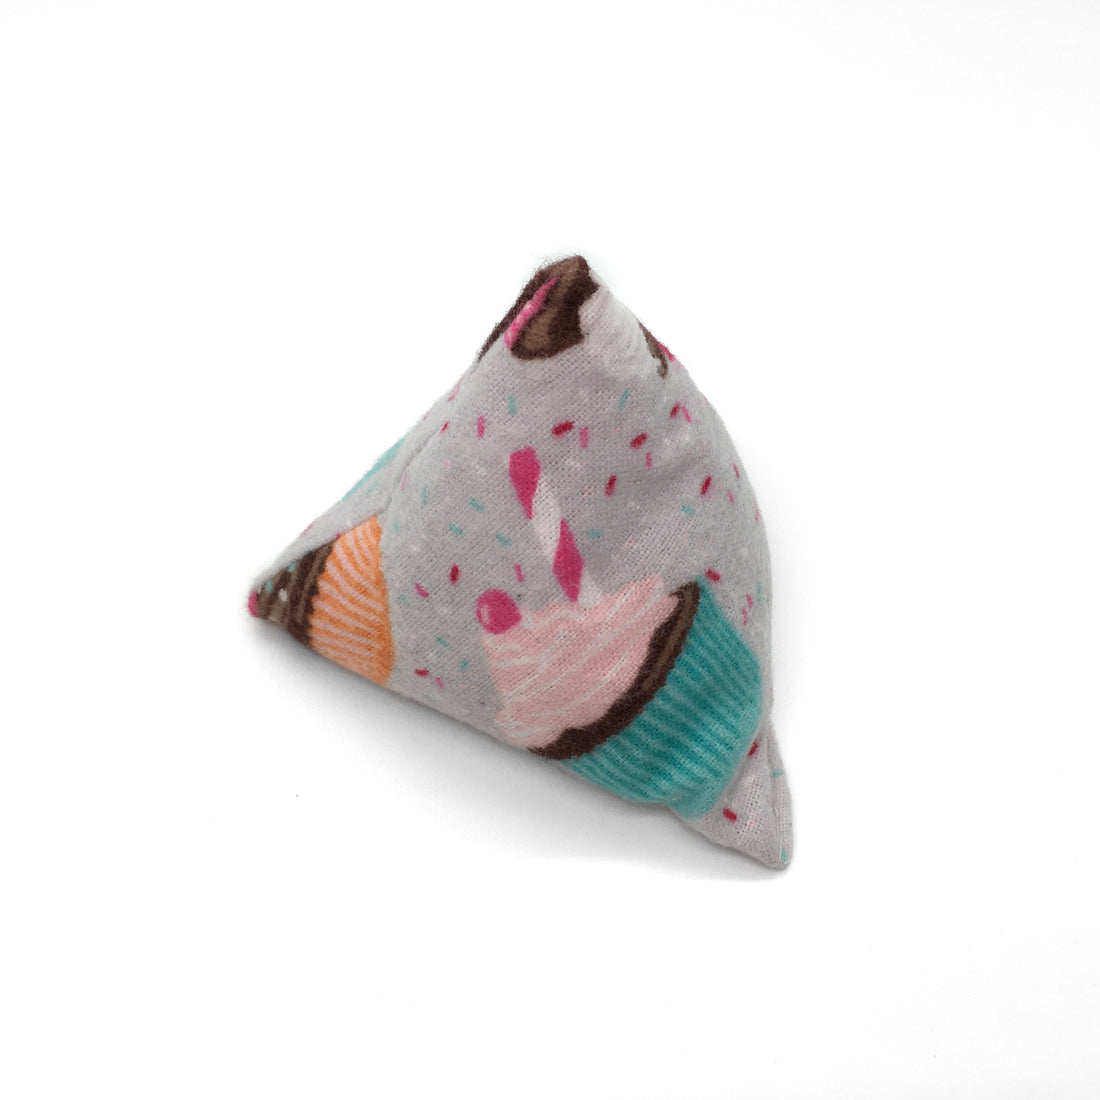 Catnip Catty Sack Cat Toy - Assorted Colors (SINGLE)